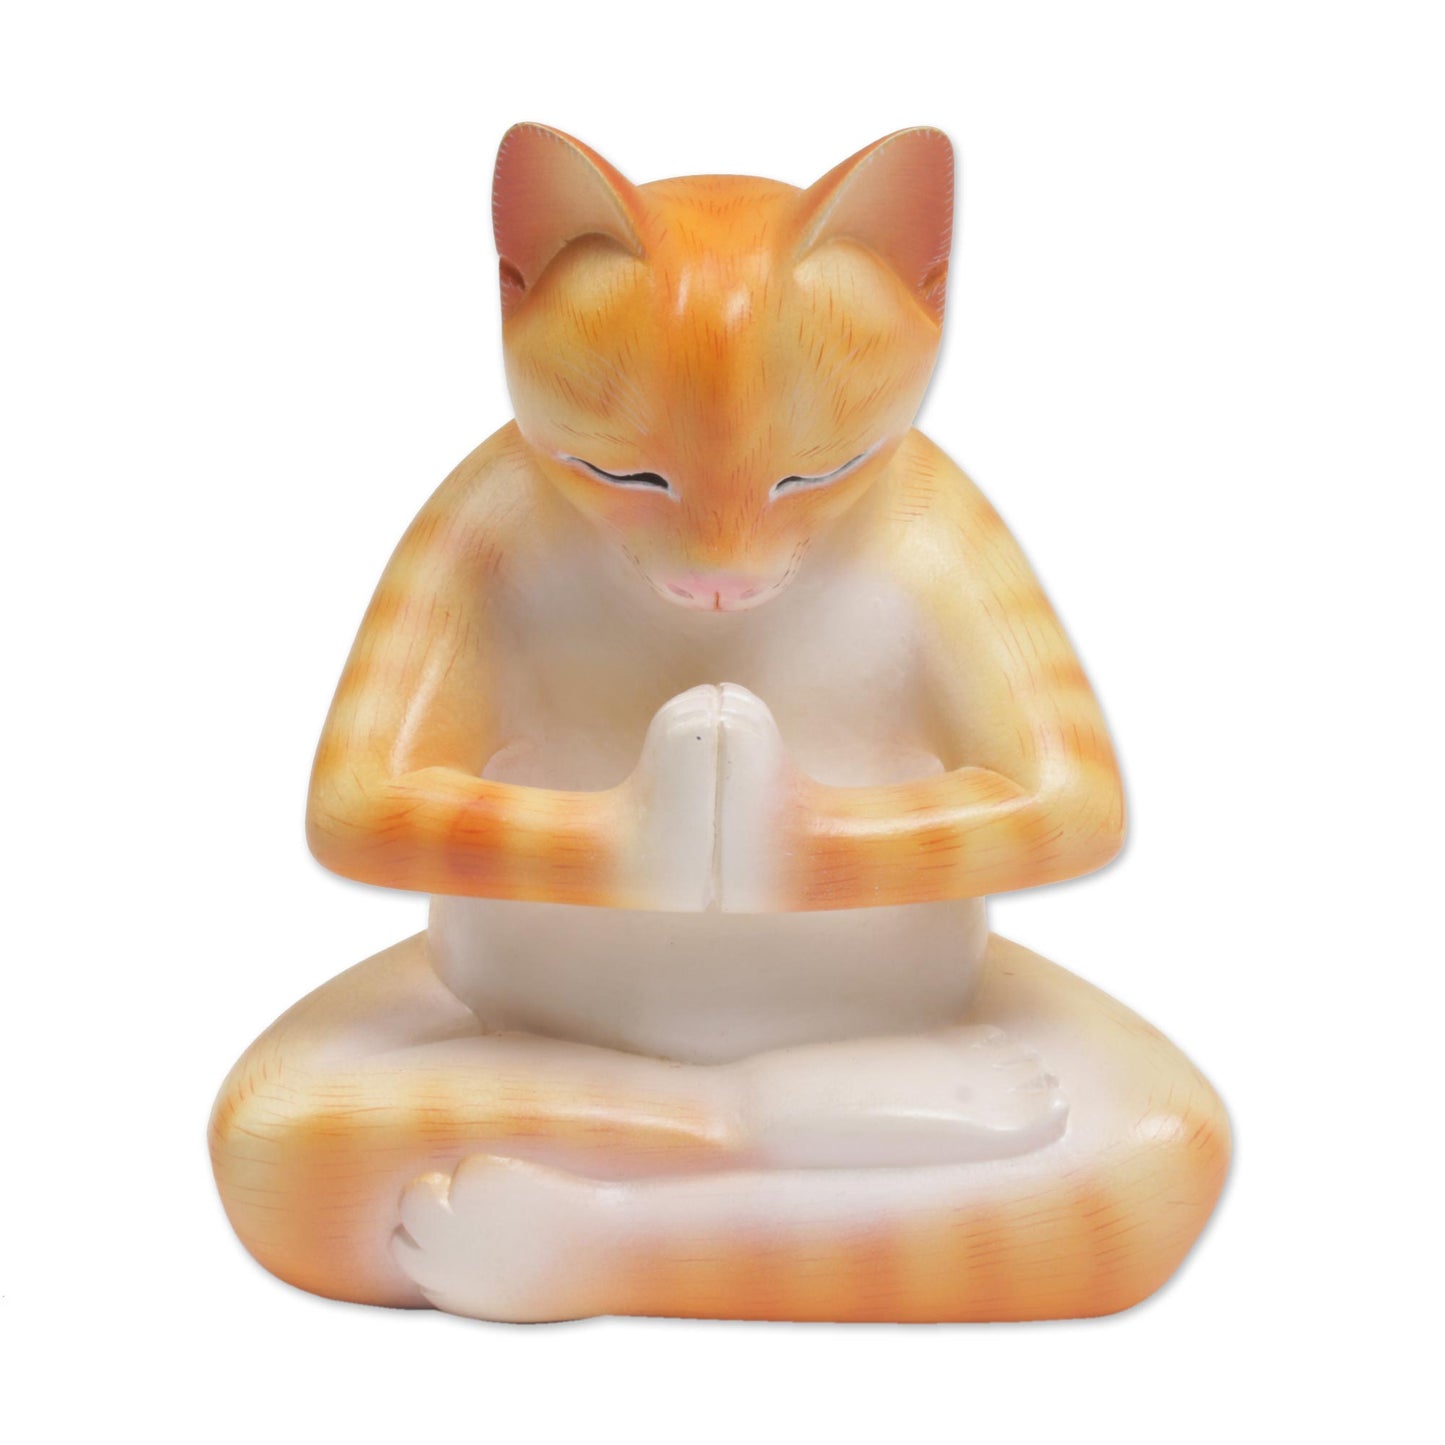 Meditating Kitty in Orange Wood Meditating Cat Statuette in Orange and White from Bali